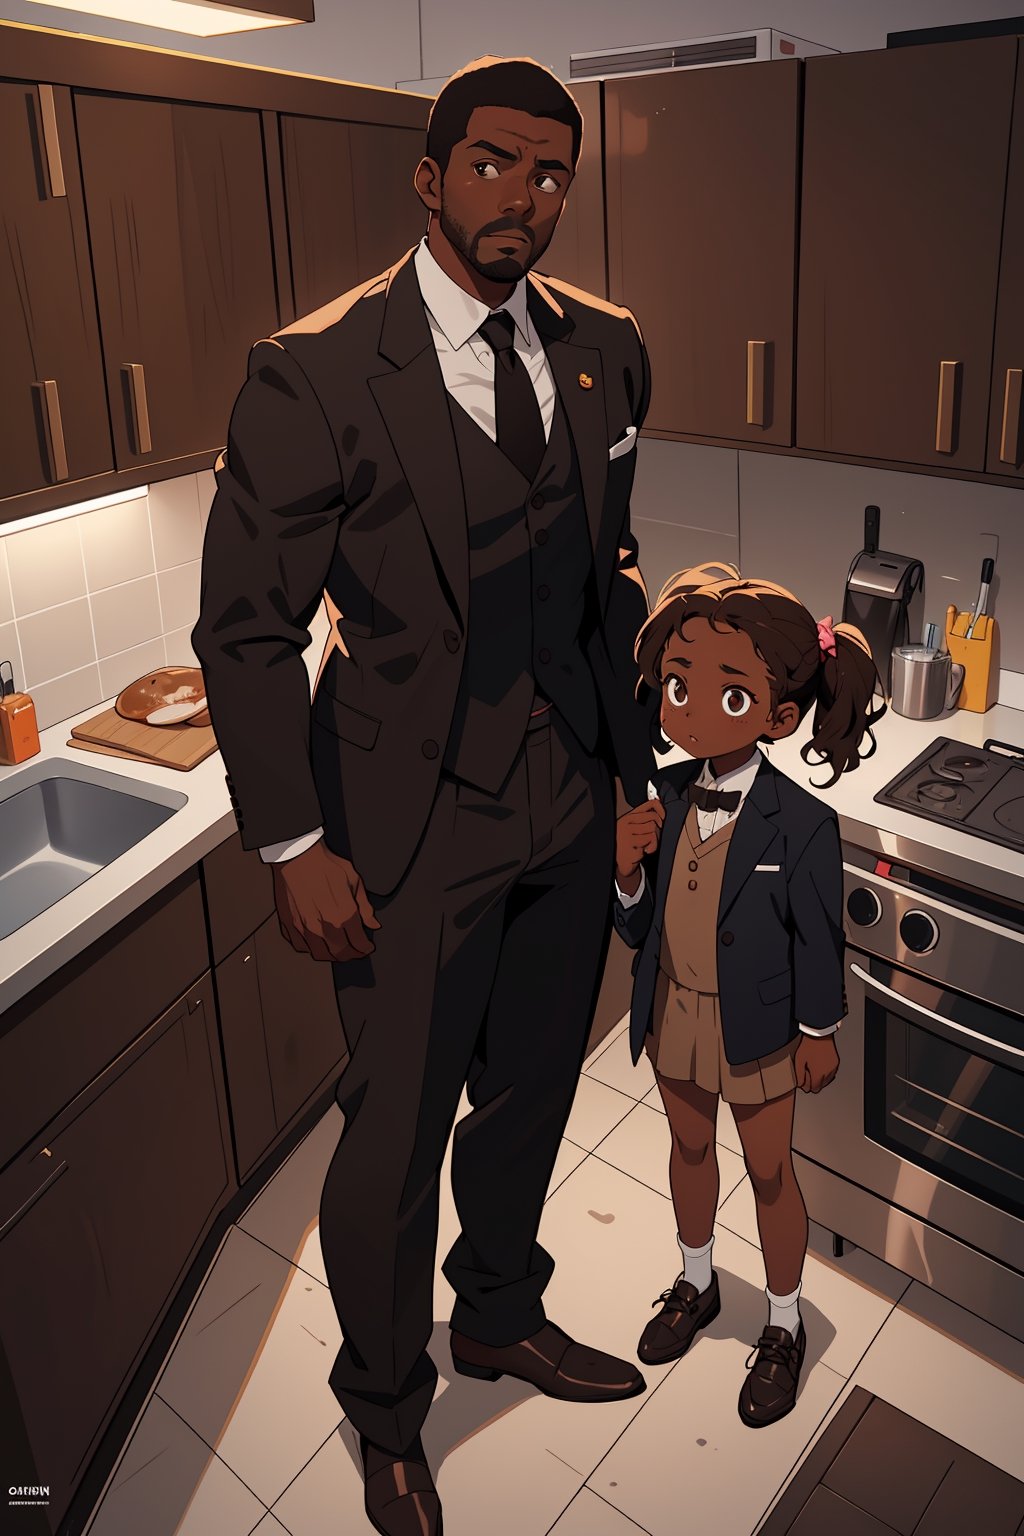 there is a man and a little girl standing in a kitchen, father with child, black art, ( ( brown skin ) ), father figure image, wearing a worn out brown suit, kevin hart, black man, bespoke, award winning magazine photo, viral photo, award-winning magazine photo, black body, girl in a suit, daddy energy, african american elegant girl